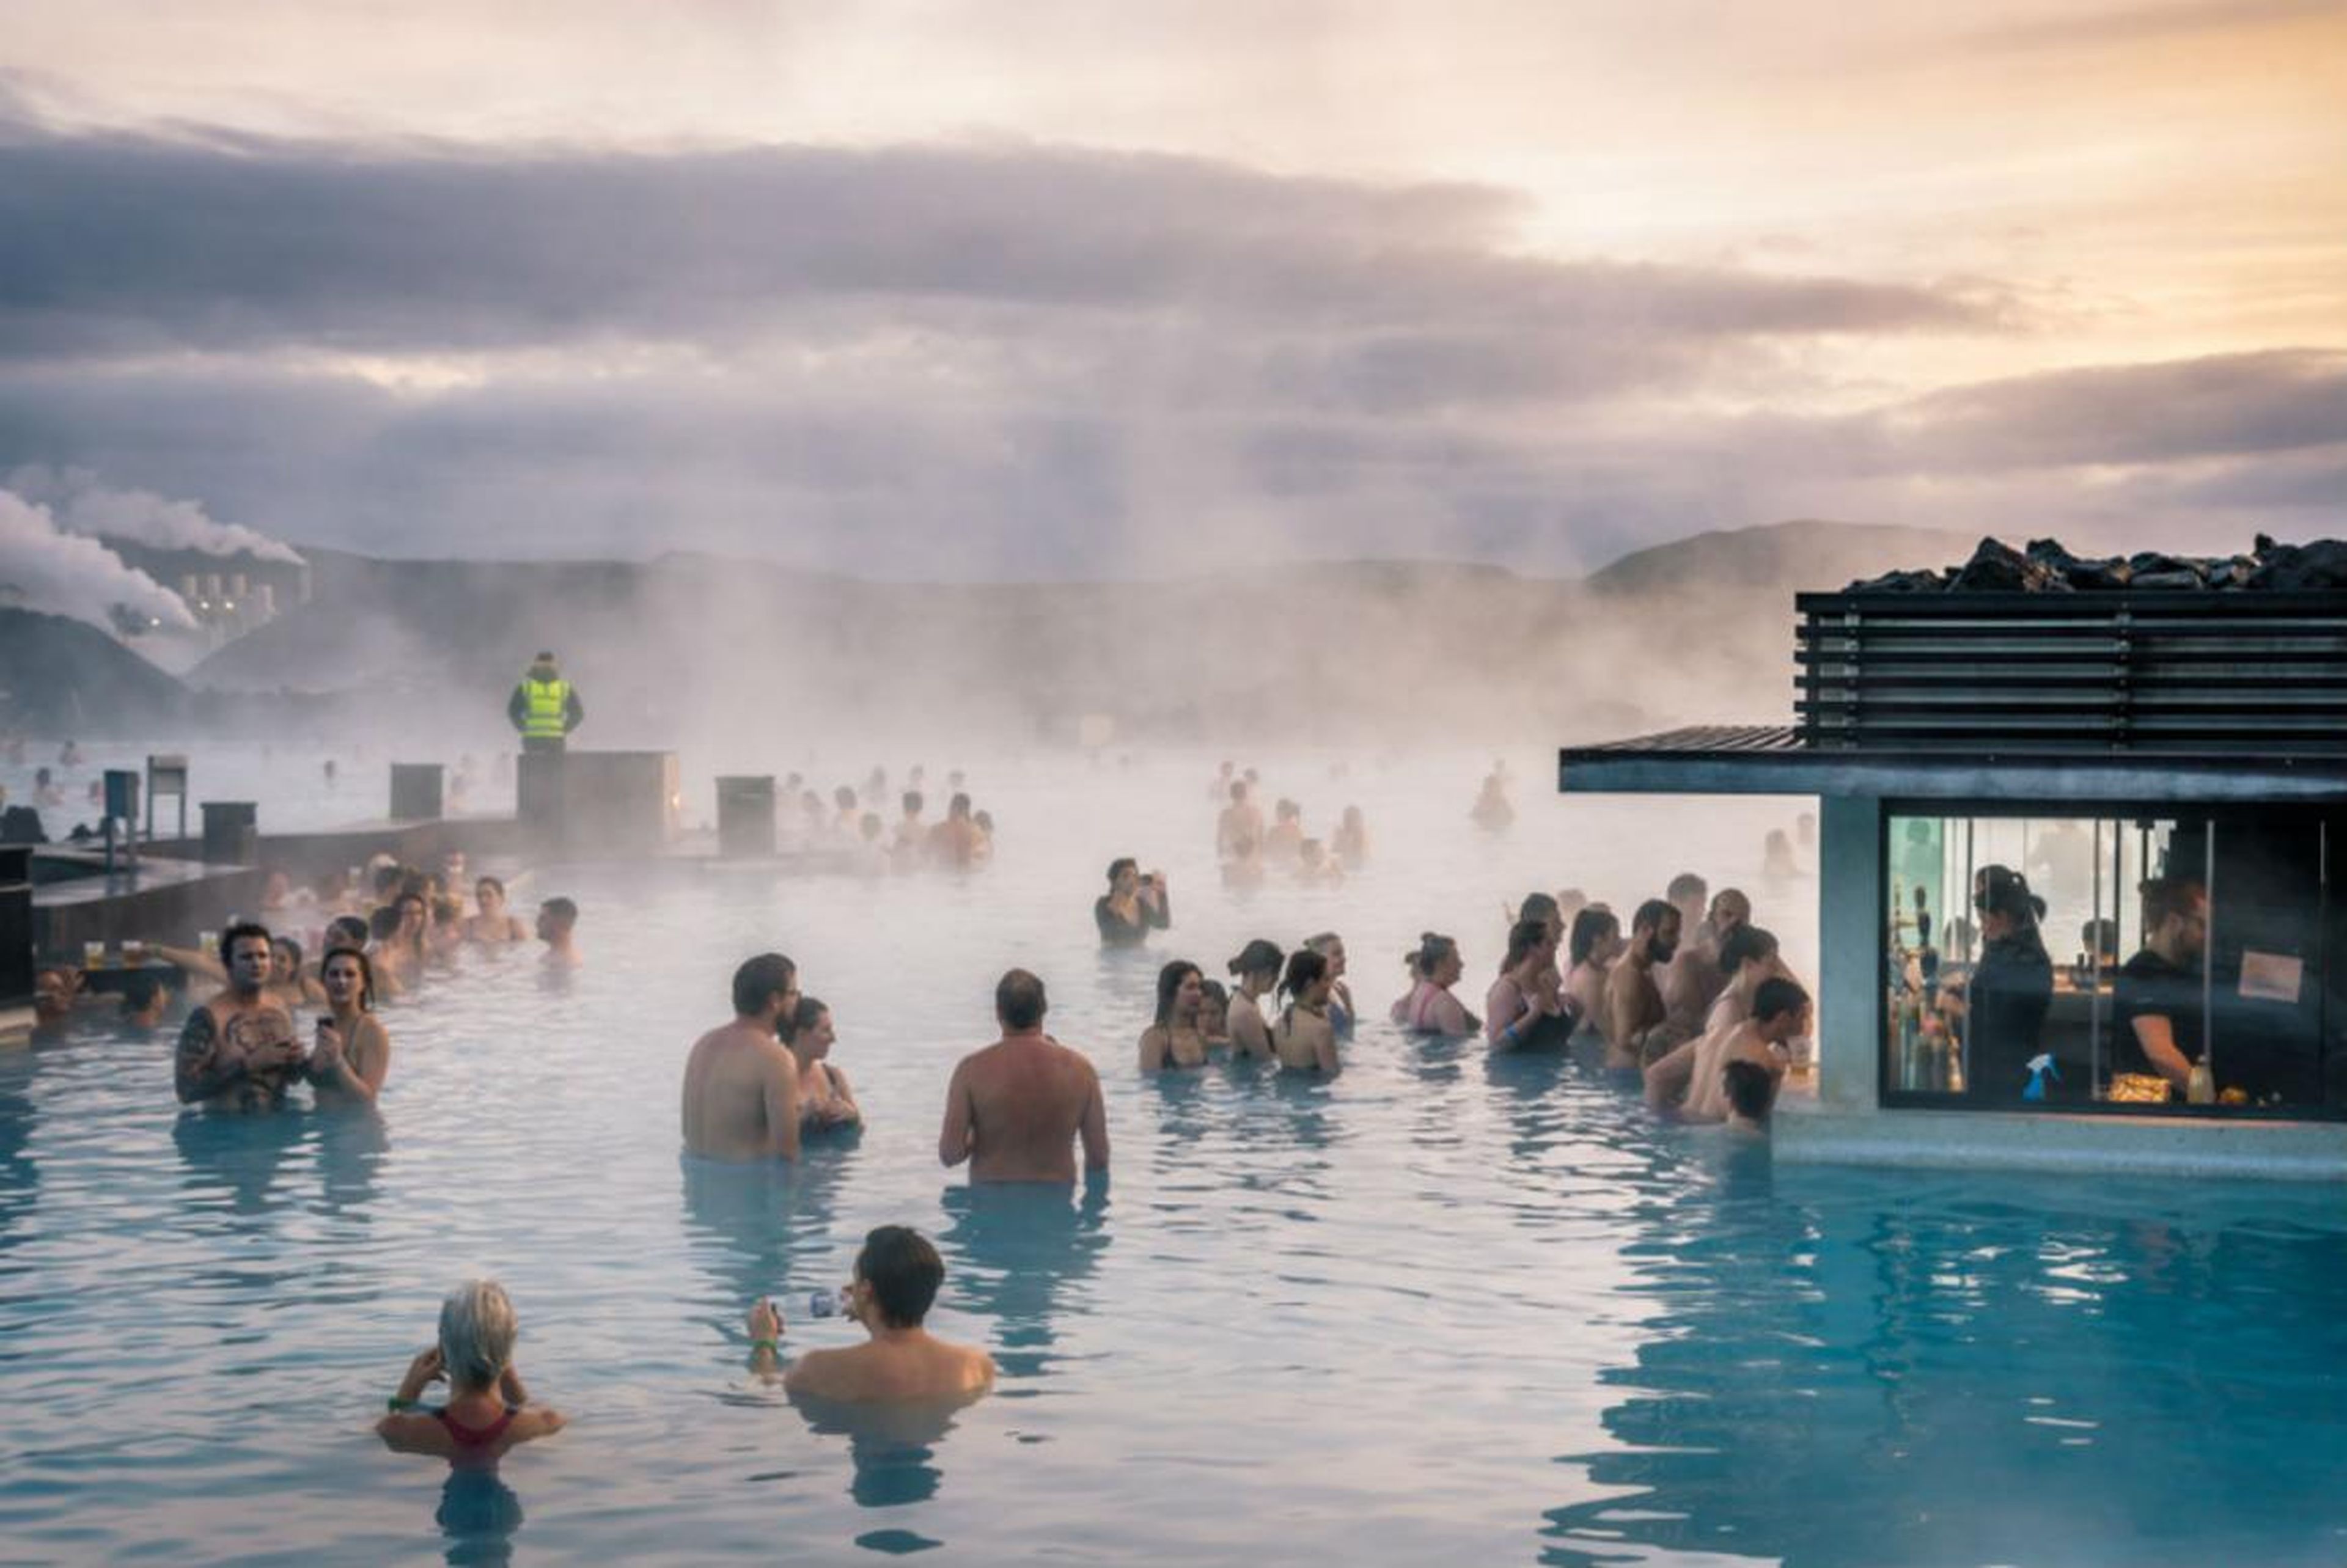 Crowds are common at Iceland's Blue Lagoon.